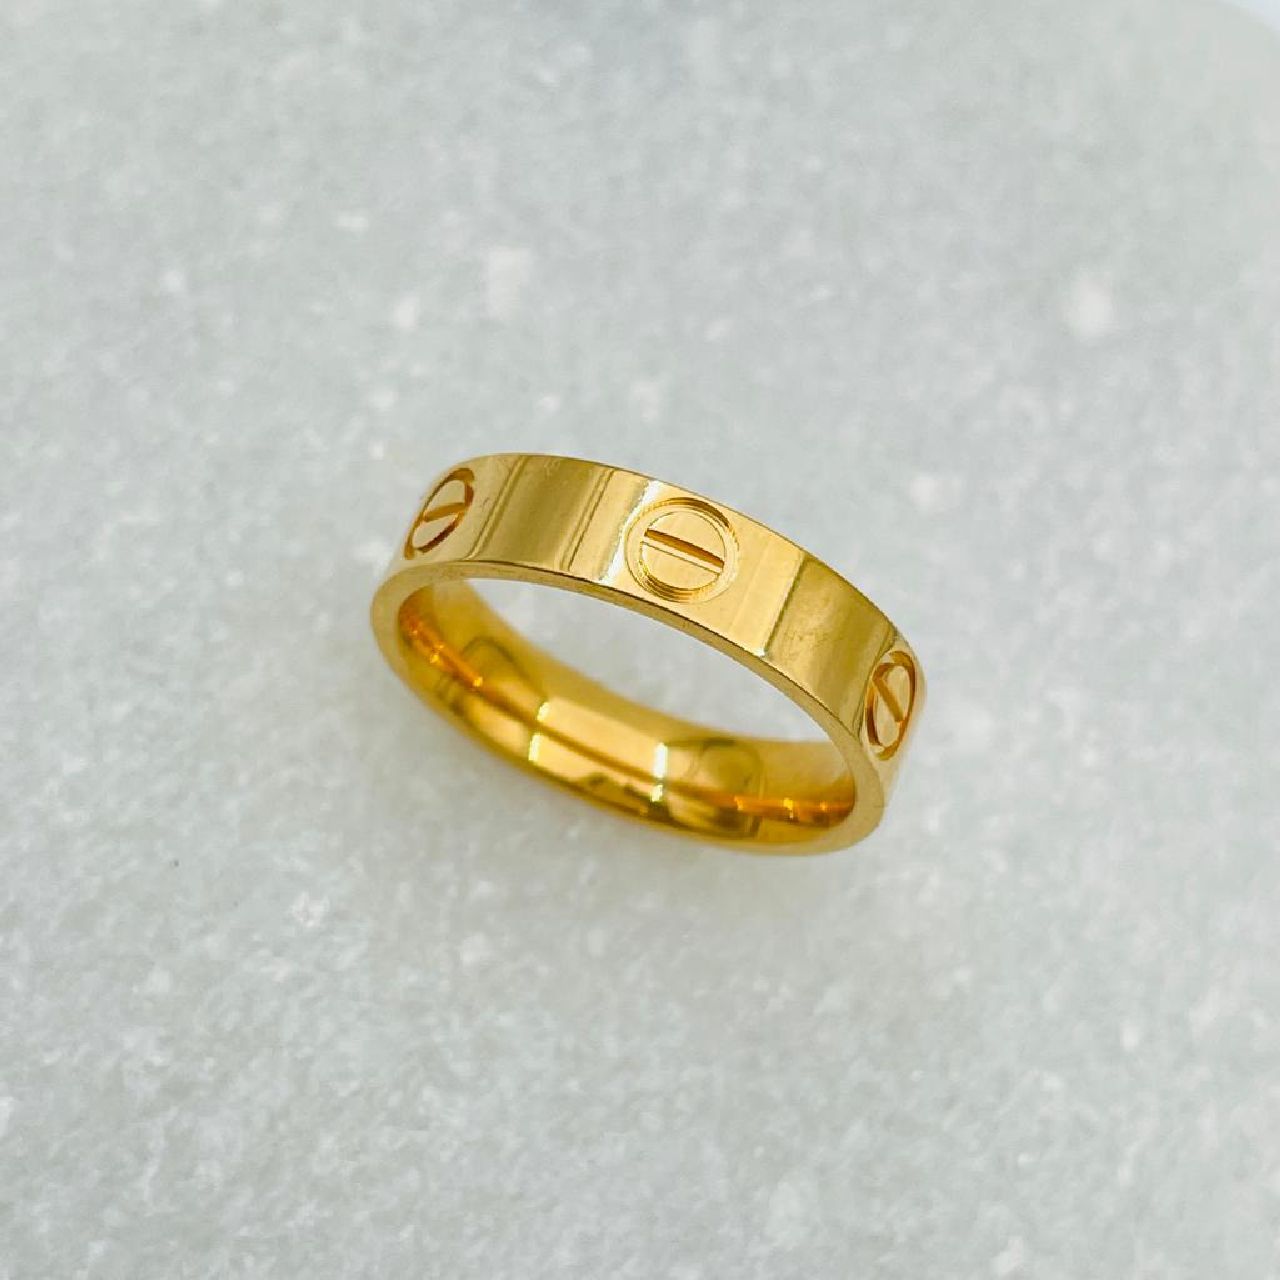 Buy quality Designer gold band ring in Pune